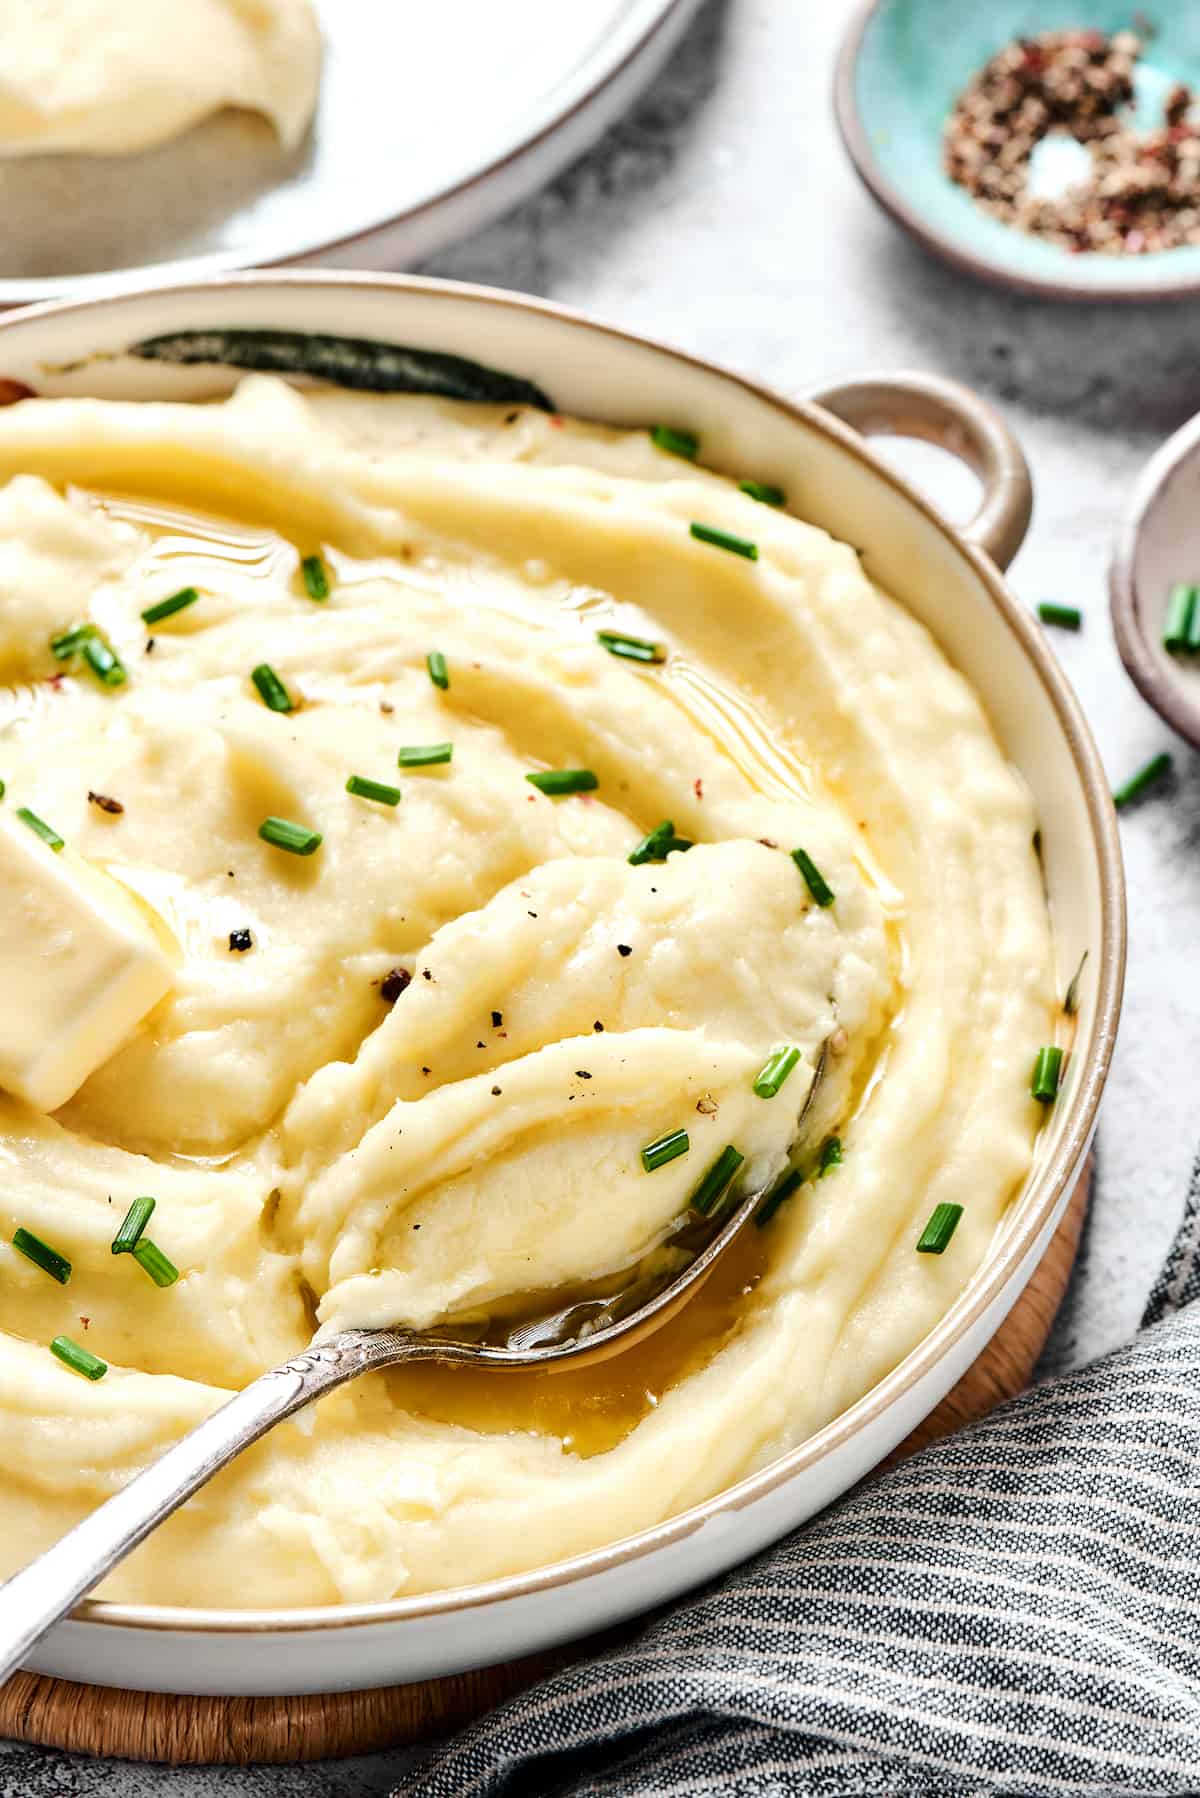 A spoon in a pan of mashed potatoes